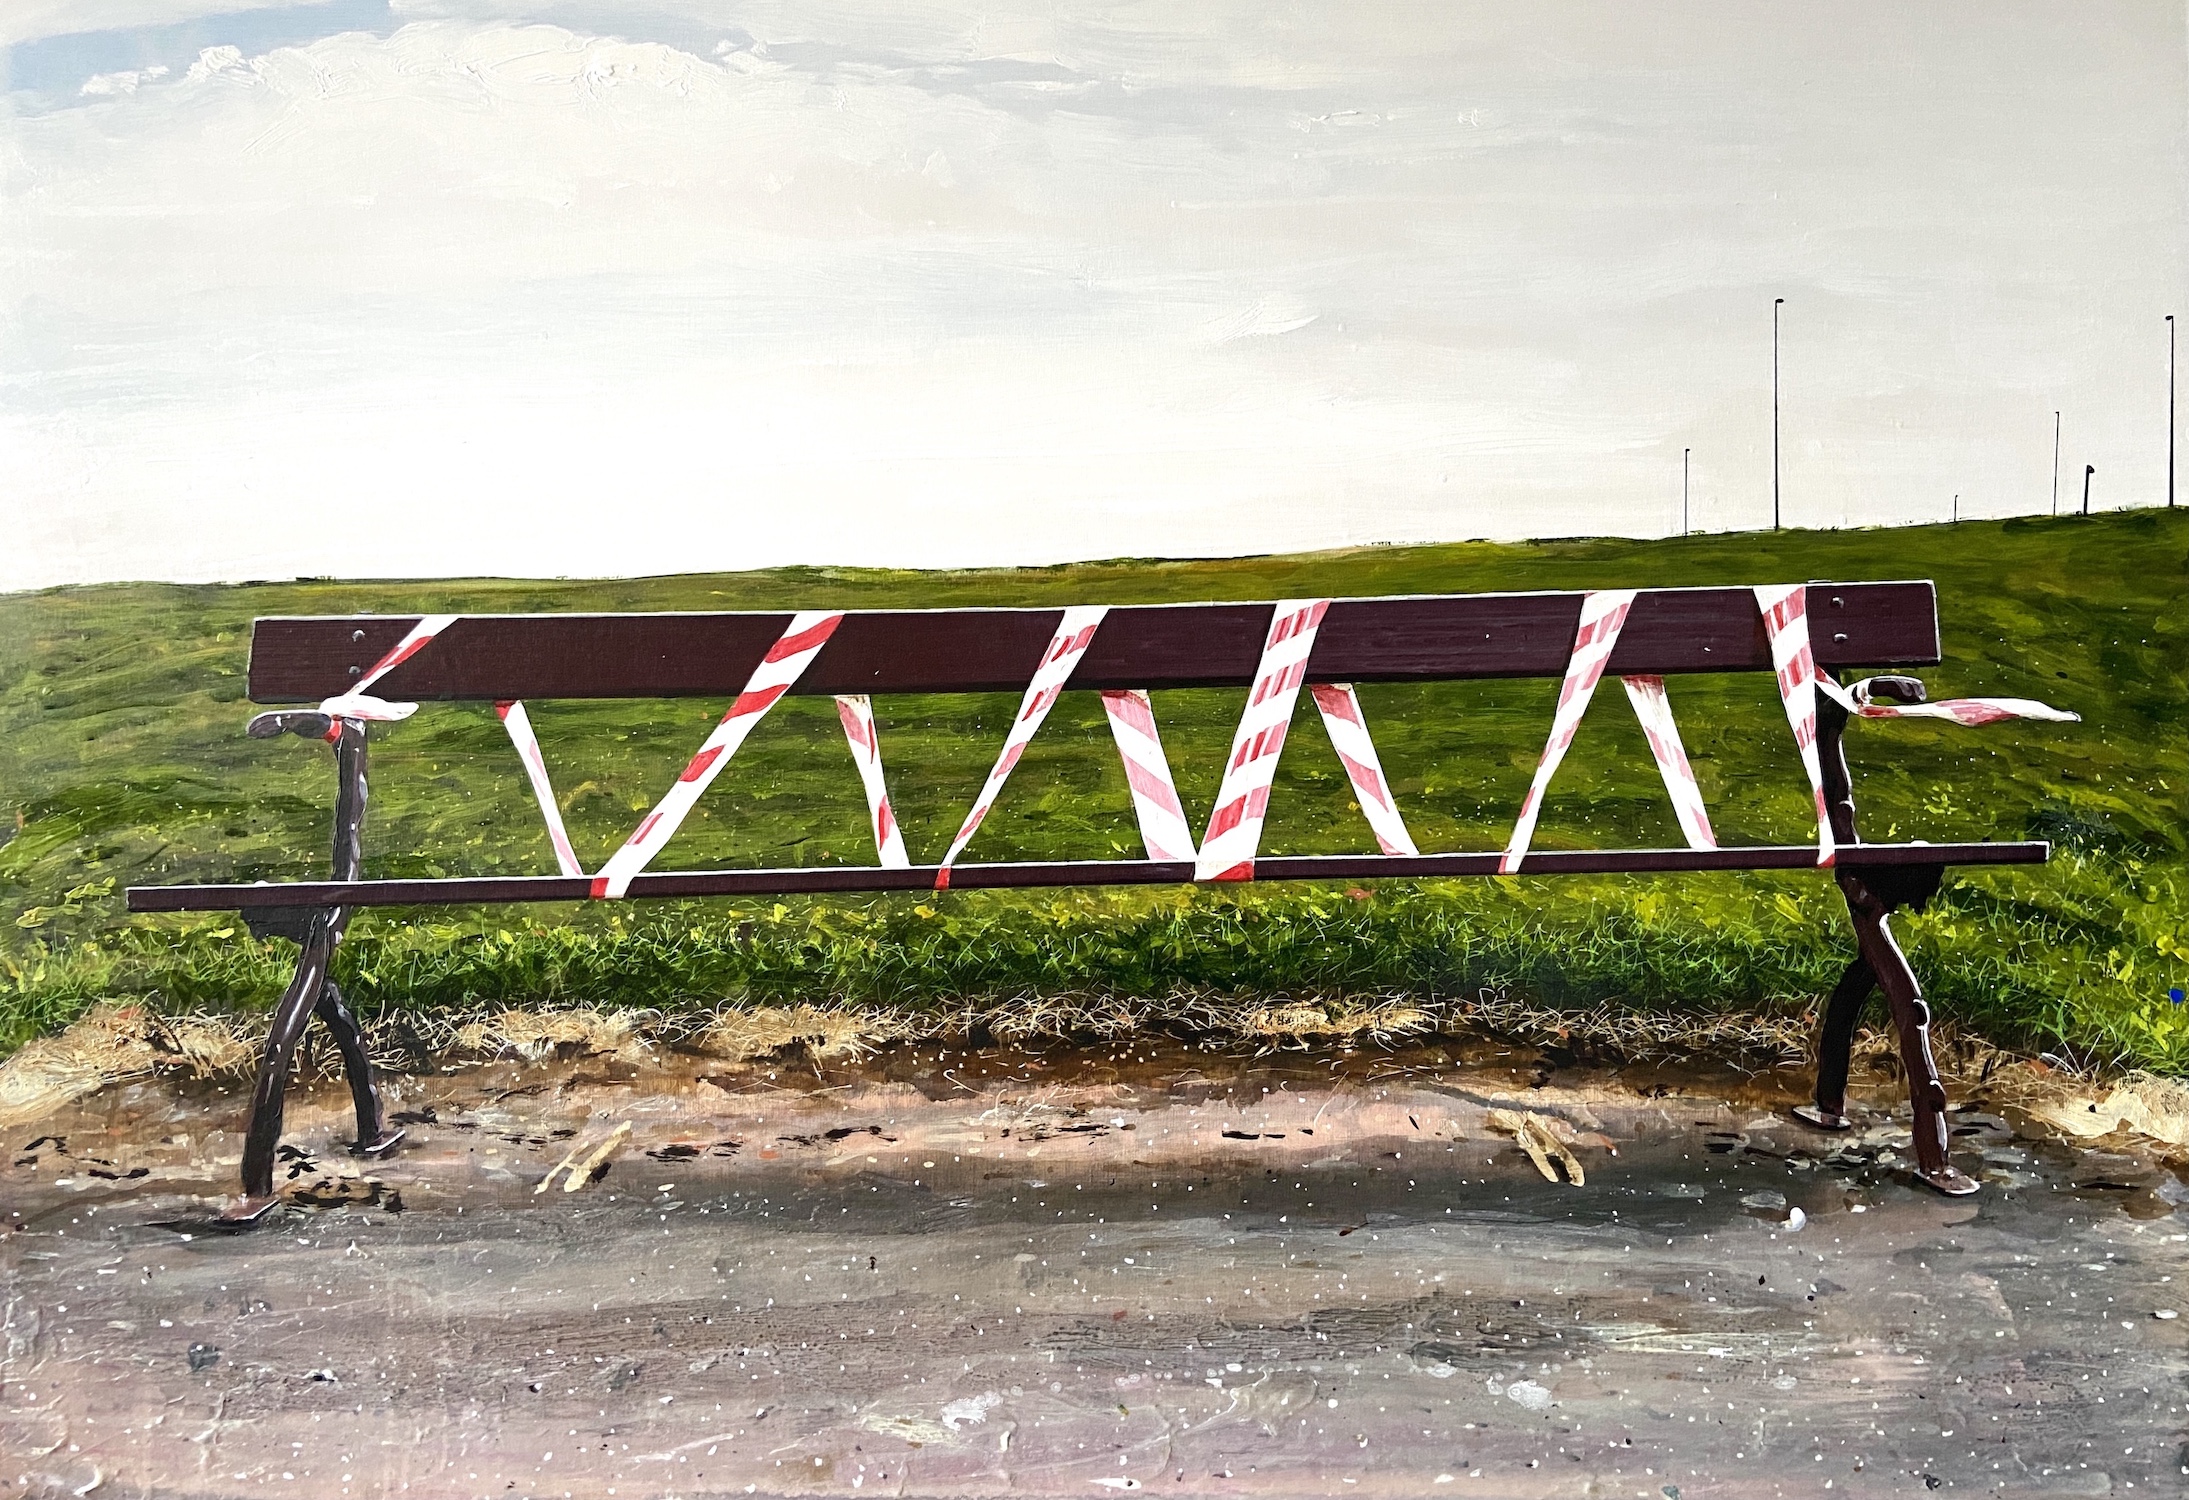 'Untitled Bench Painting (Lockdown)', Narbi Price, Acrylic on panel, 70 x 100 cm